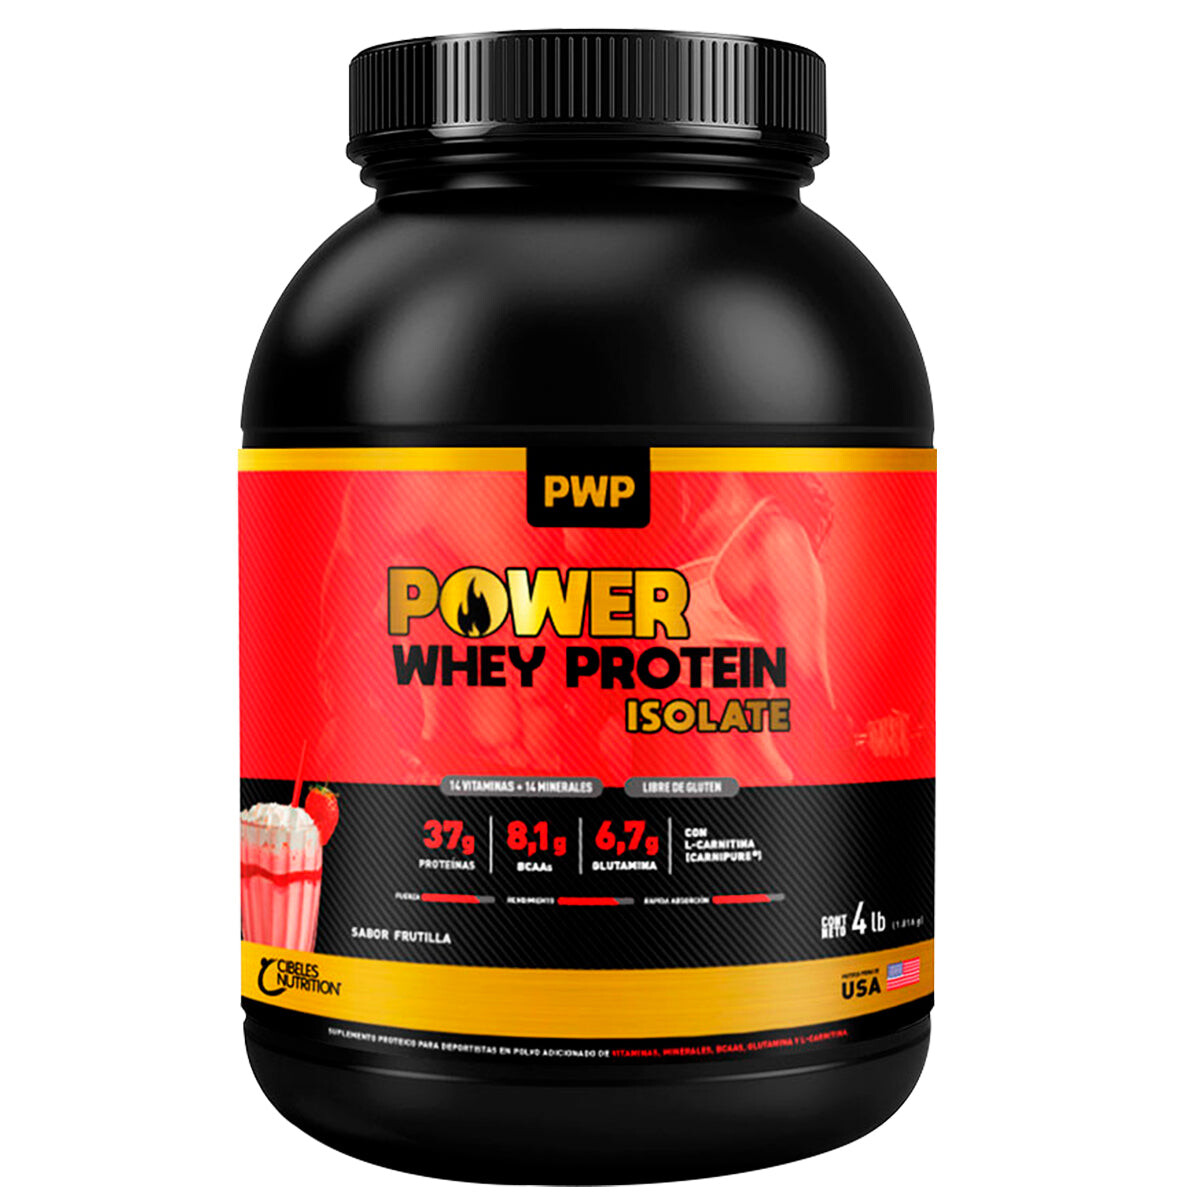 Suplemento Pwp Whey Protein Isolate 1816g Calidad USA 